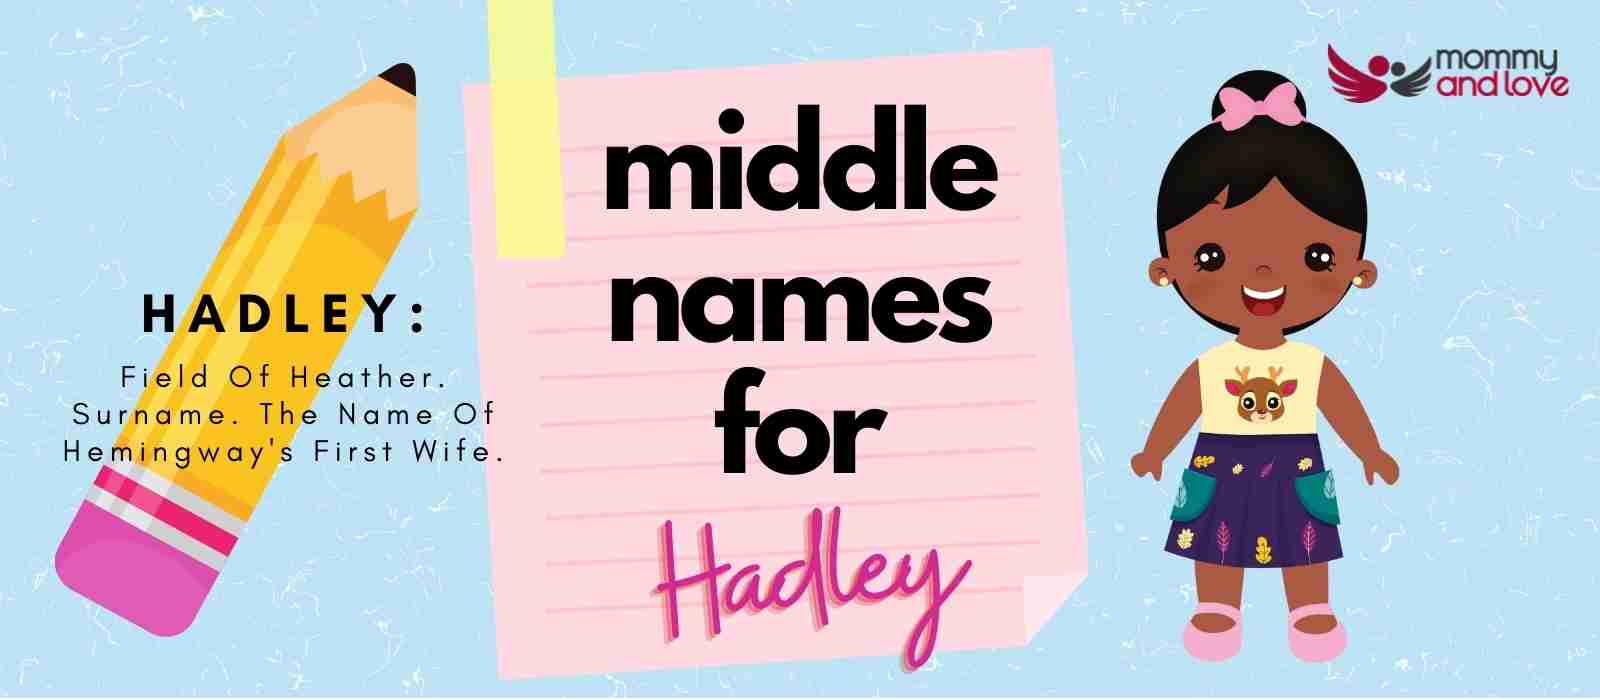 Middle Names for Hadley